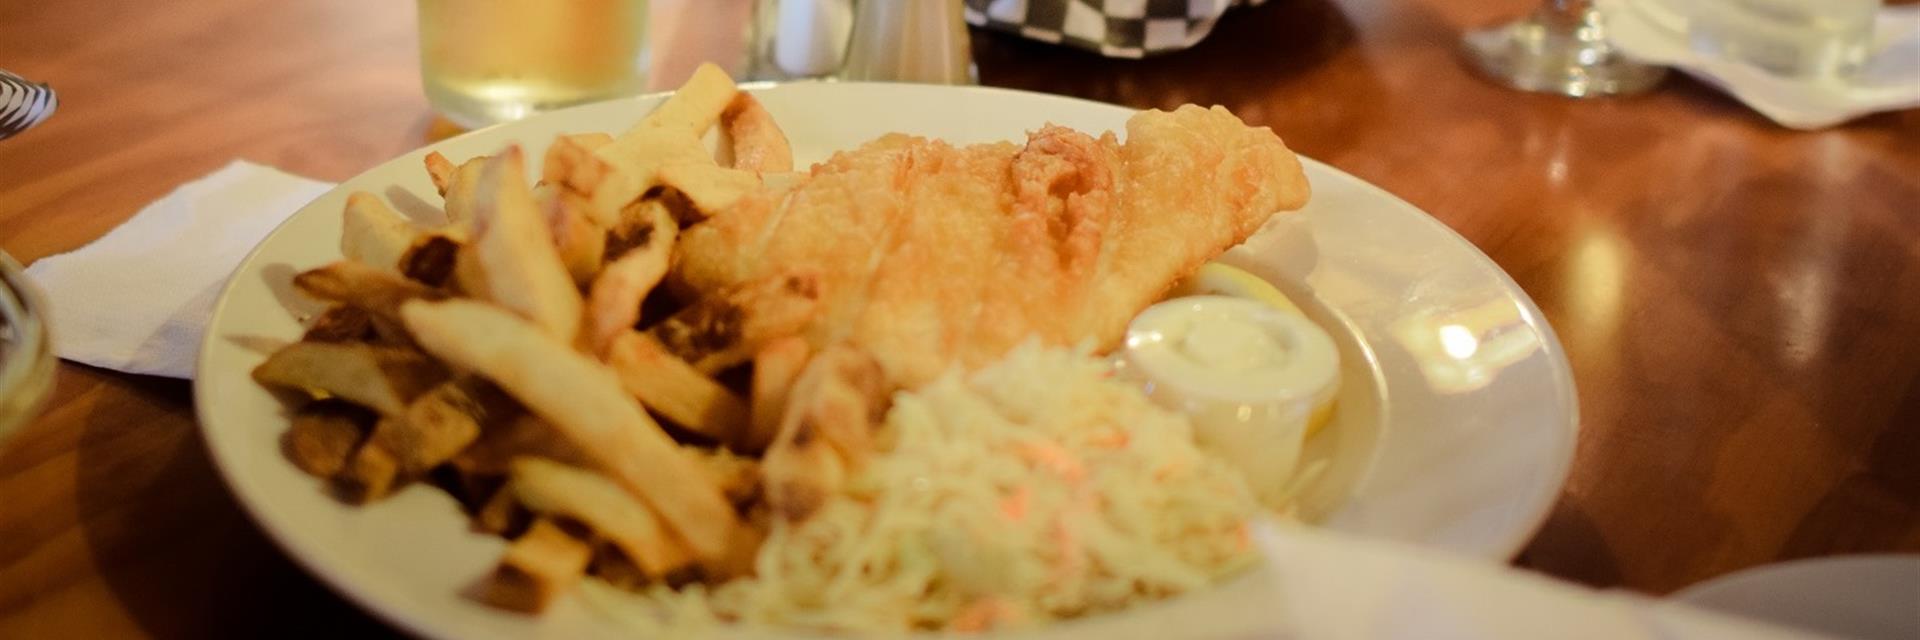 fish and chips dinner on a plate 